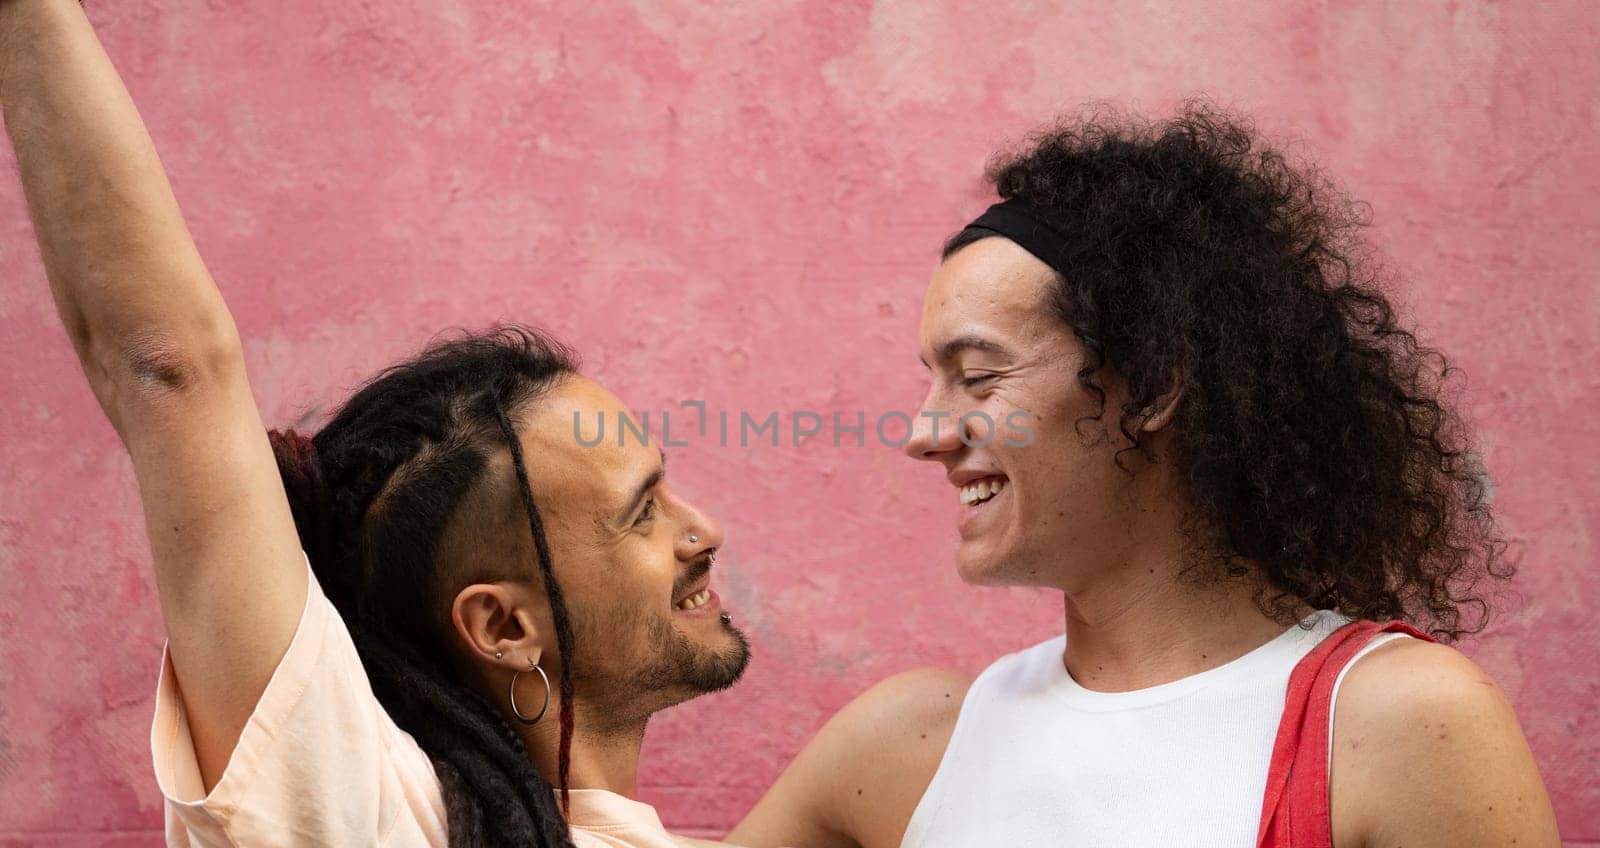 Two gay couple men are smiling and looking at each other with love and happiness isolated on pink background by papatonic